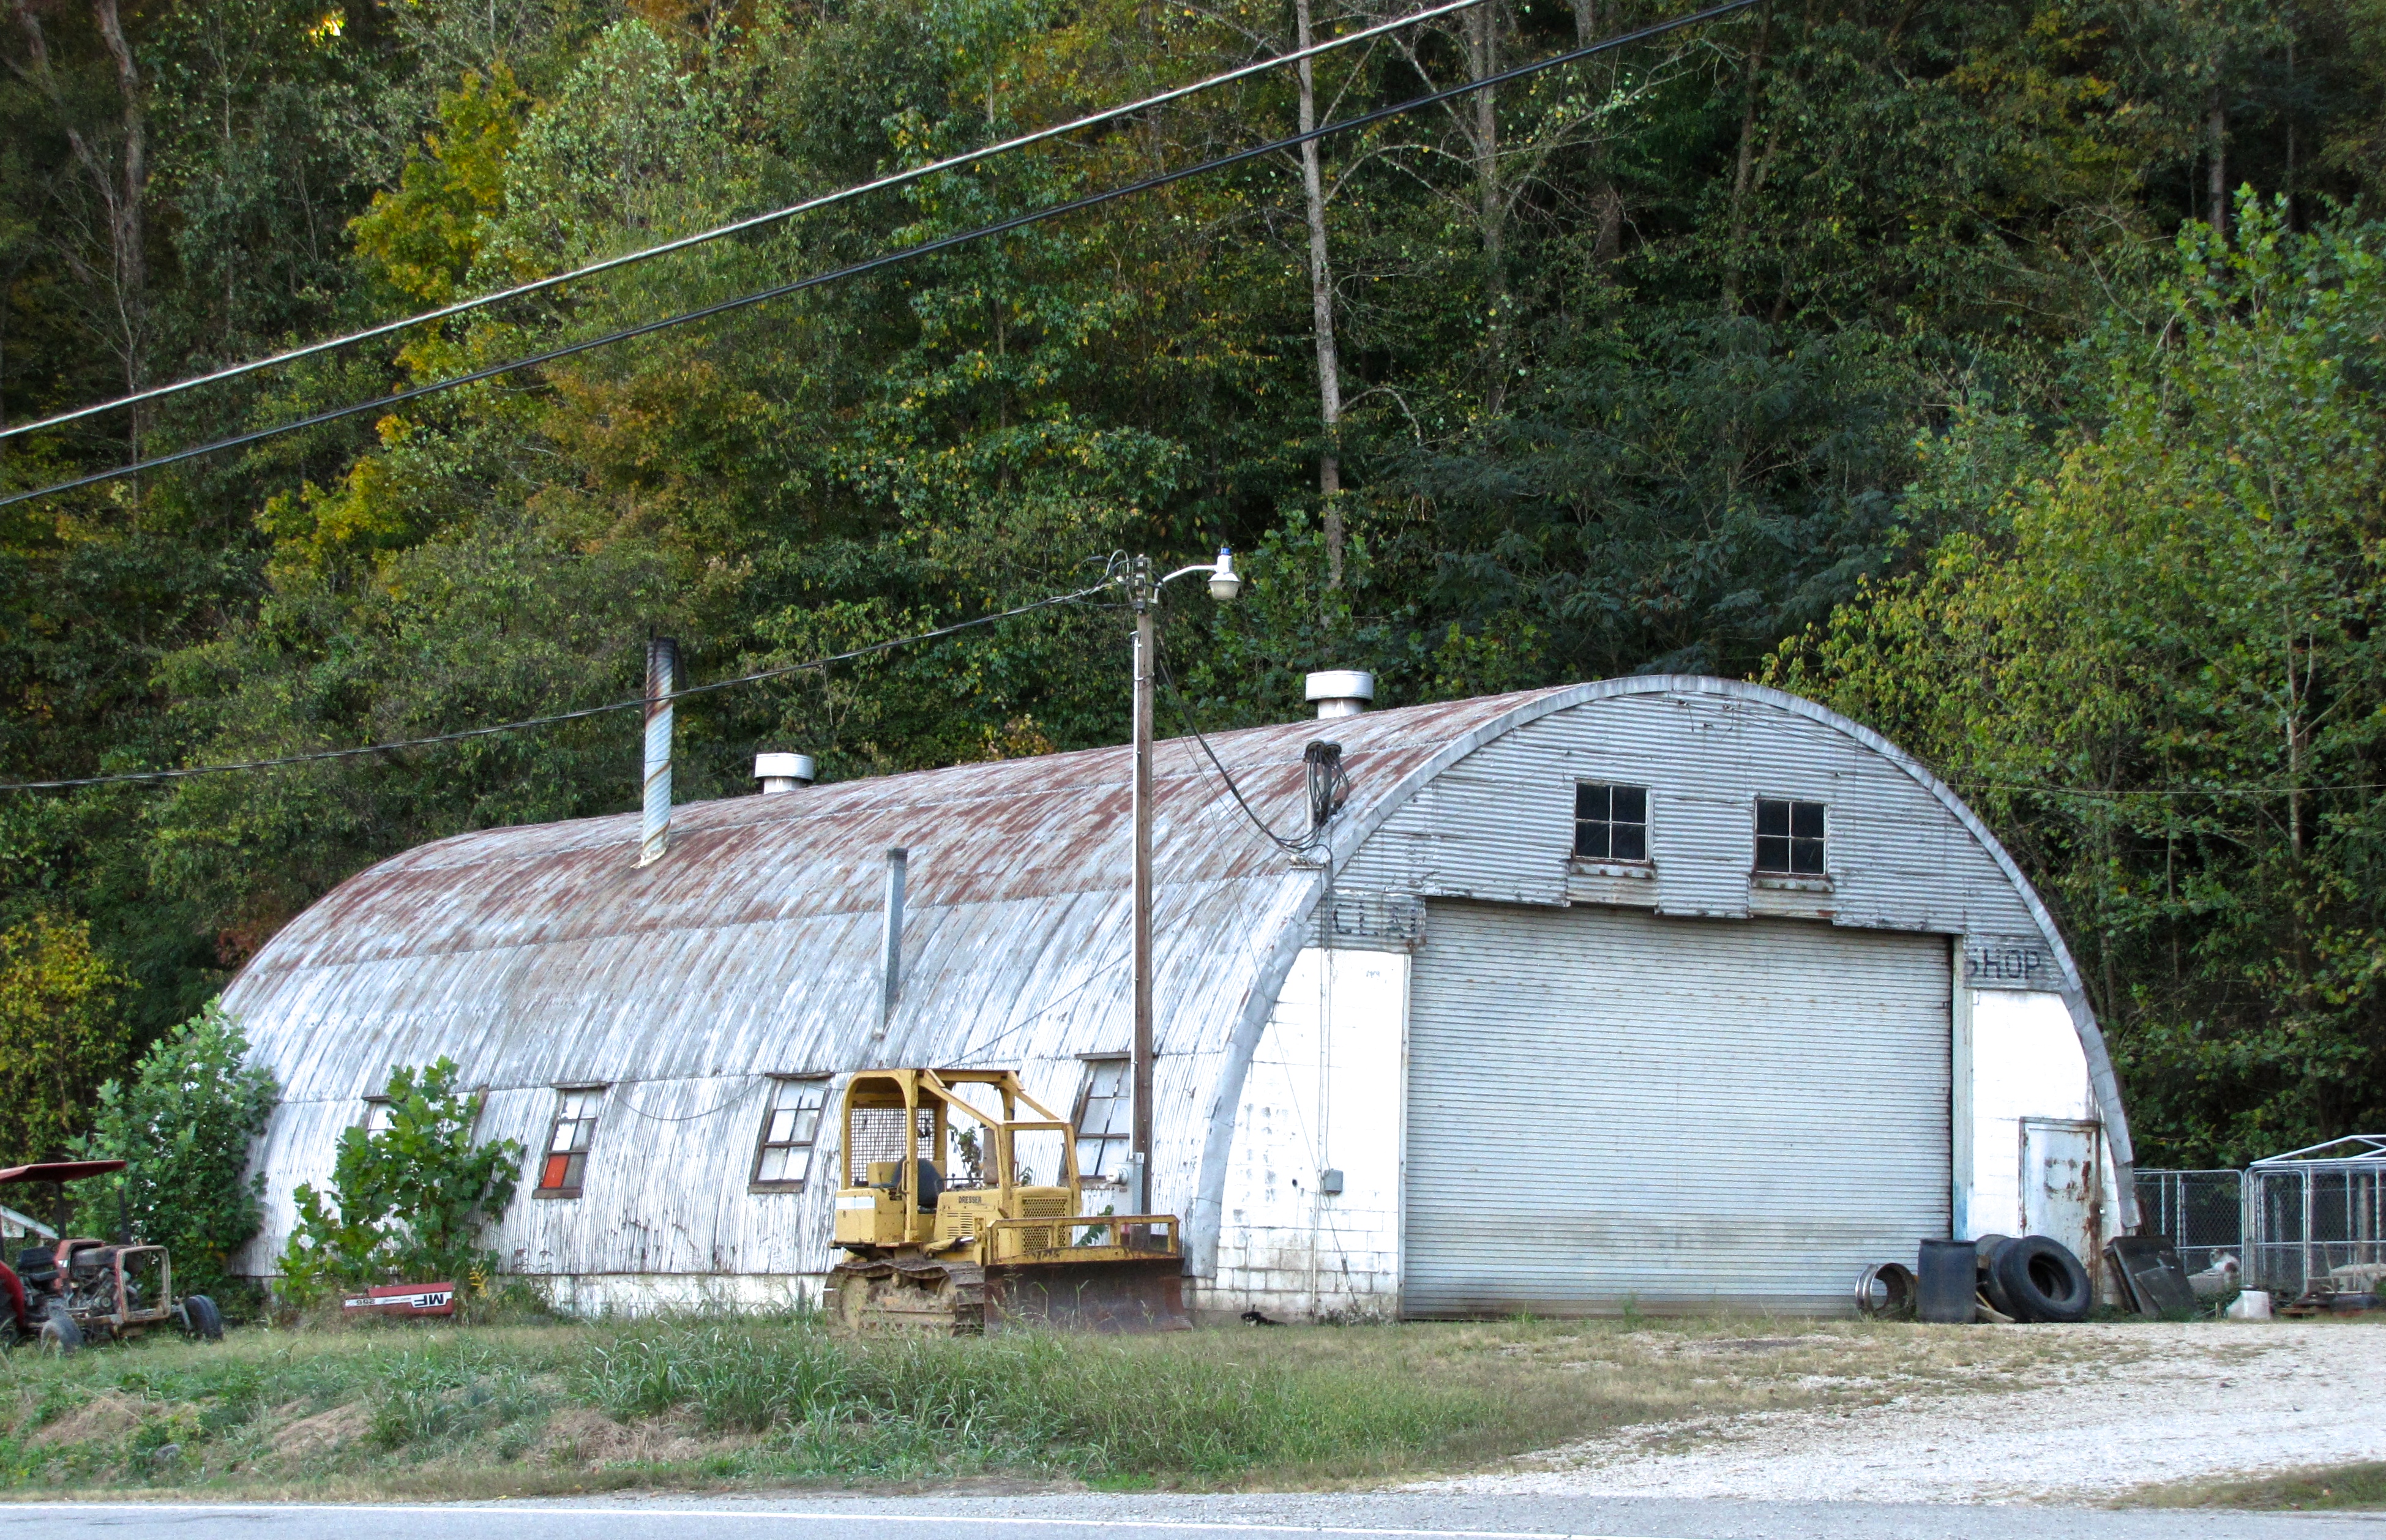 quonset hut in Terms Of Service, AL